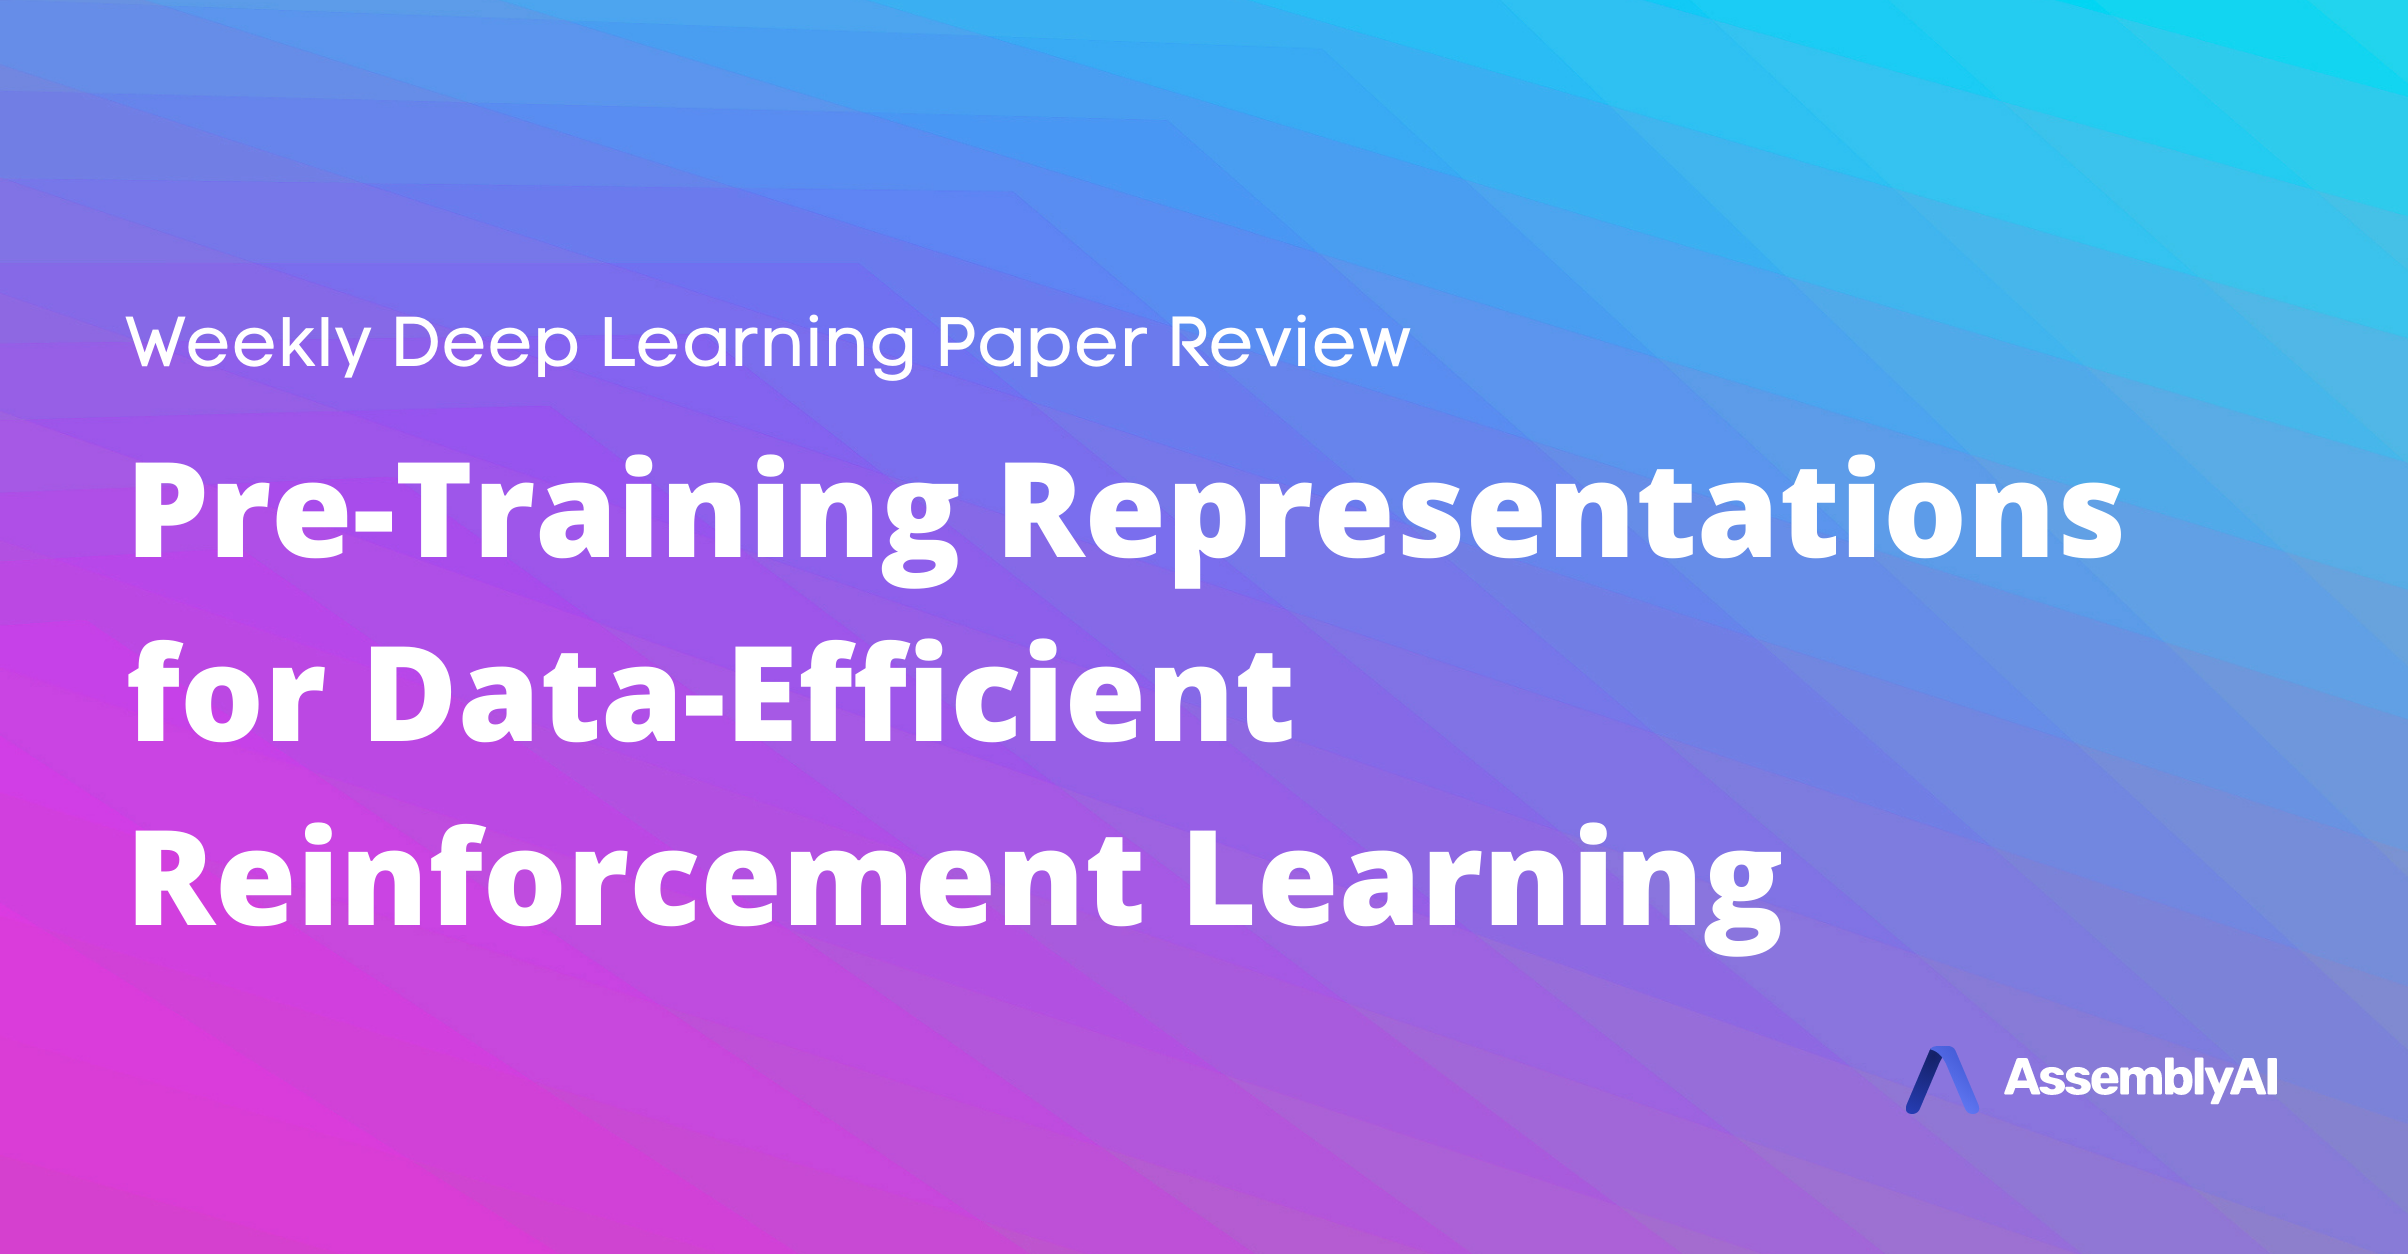 Review - Pretraining Representations for Data-Efficient Reinforcement Learning